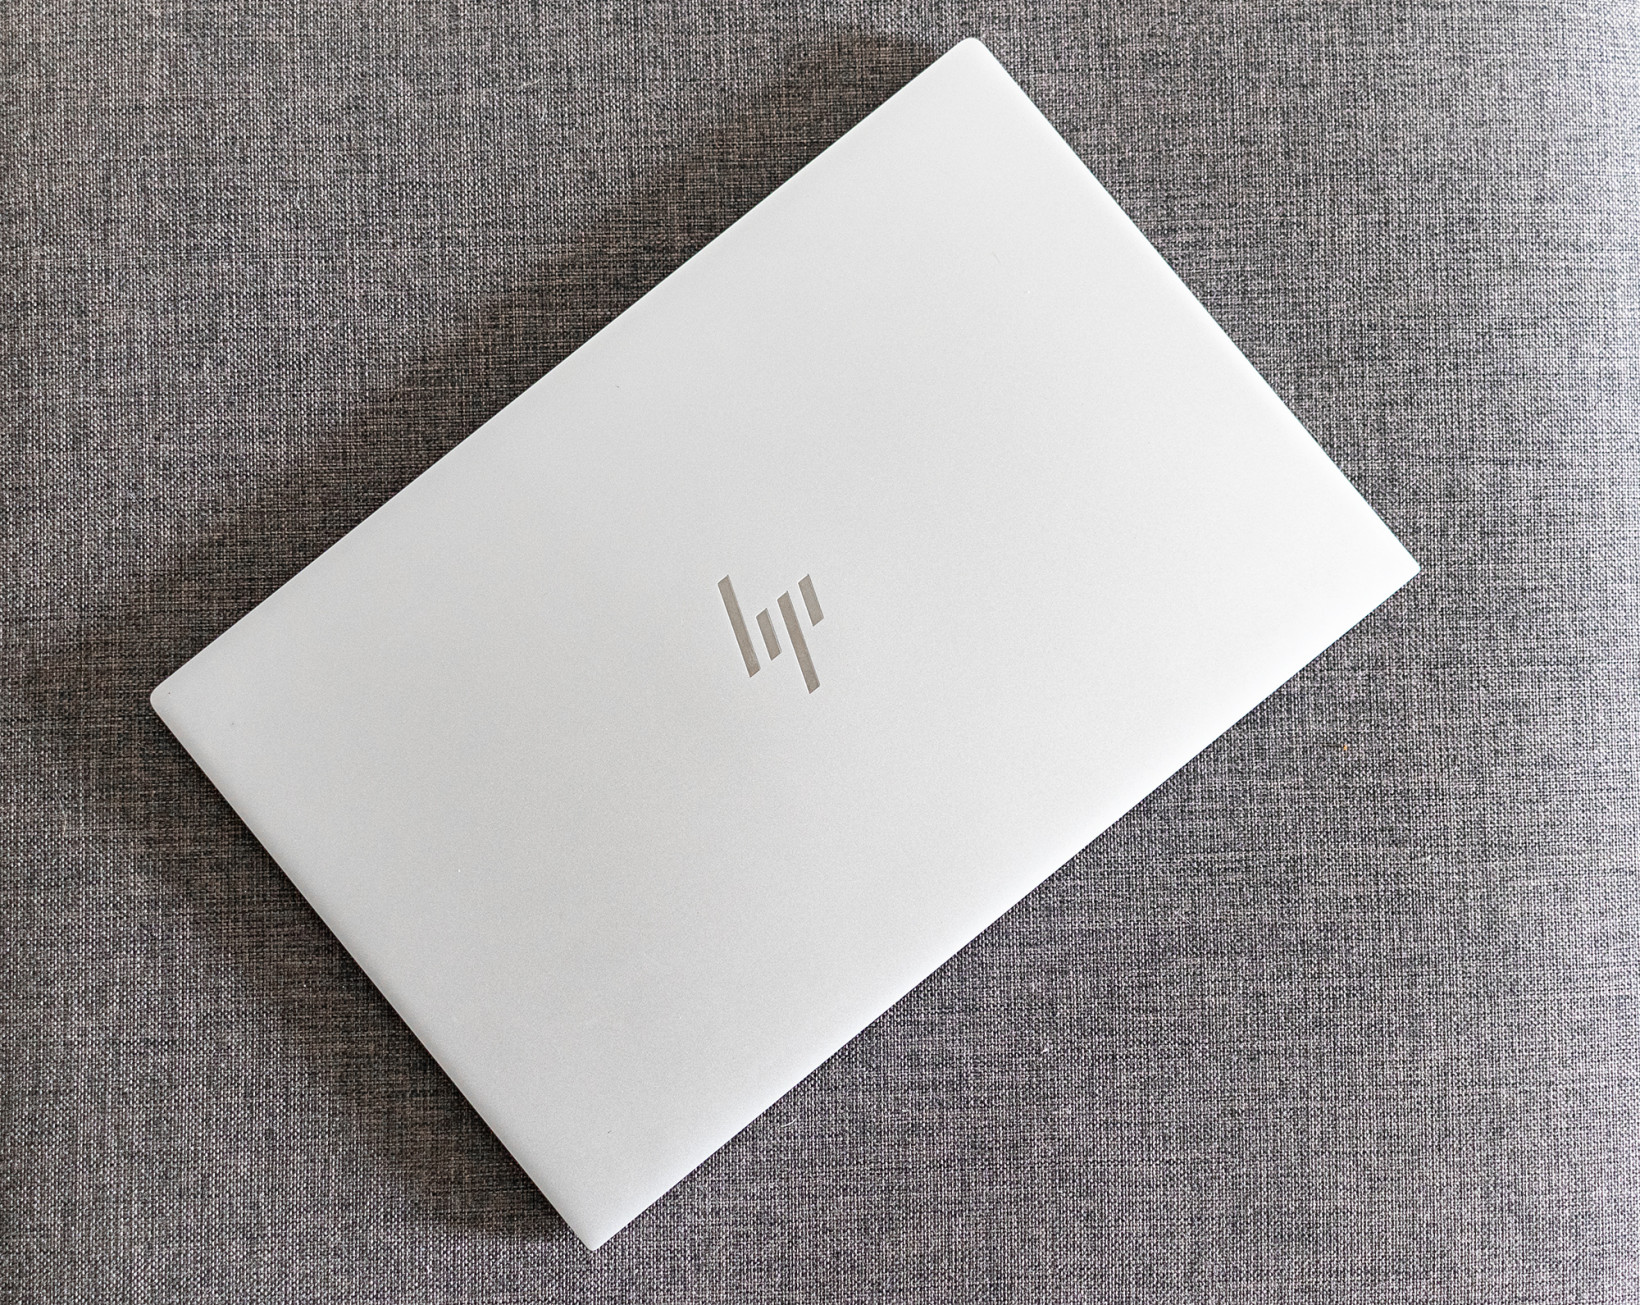 The HP Envy 15 has a beautiful silver aluminium finish on the exterior, complemented by subtle branding